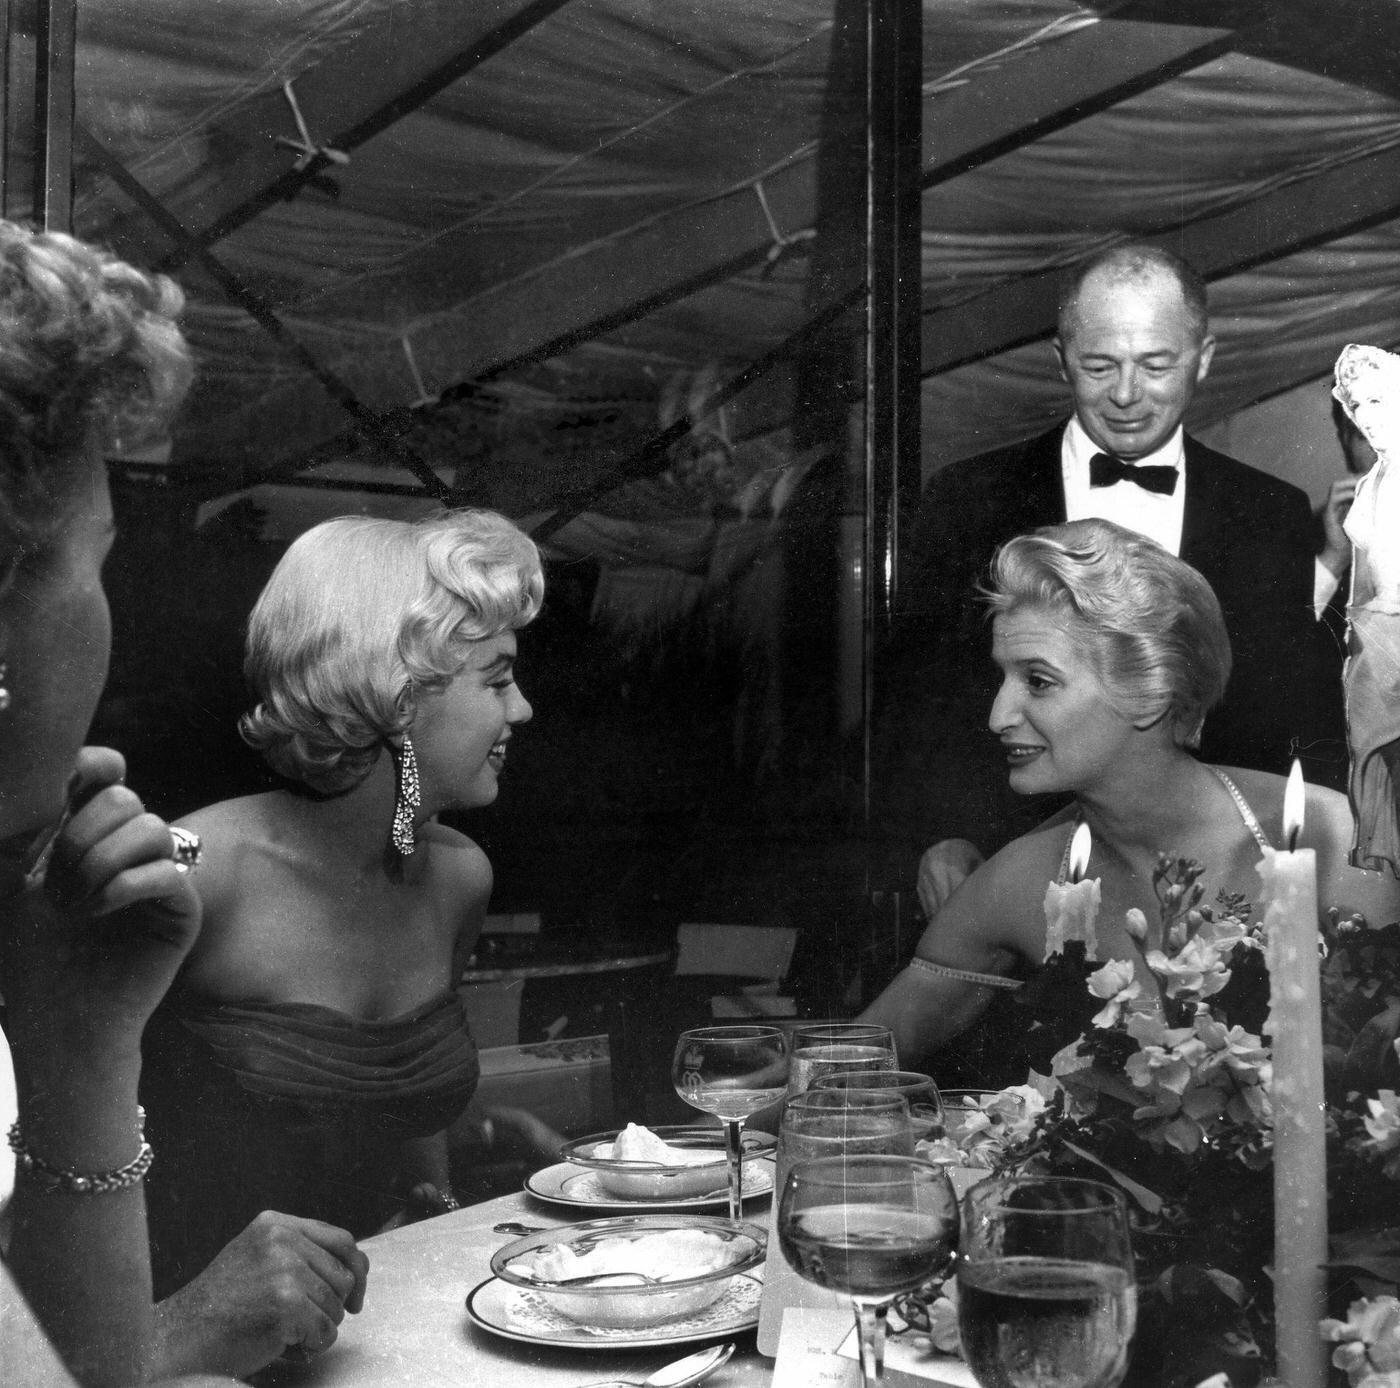 Marilyn Monroe with director Billy Wilder and Joan Axelrod, the playwright George Axelrod's wife, at the wrap party for the filming of "The Seven Year Itch" at Romanoff's Restaurant